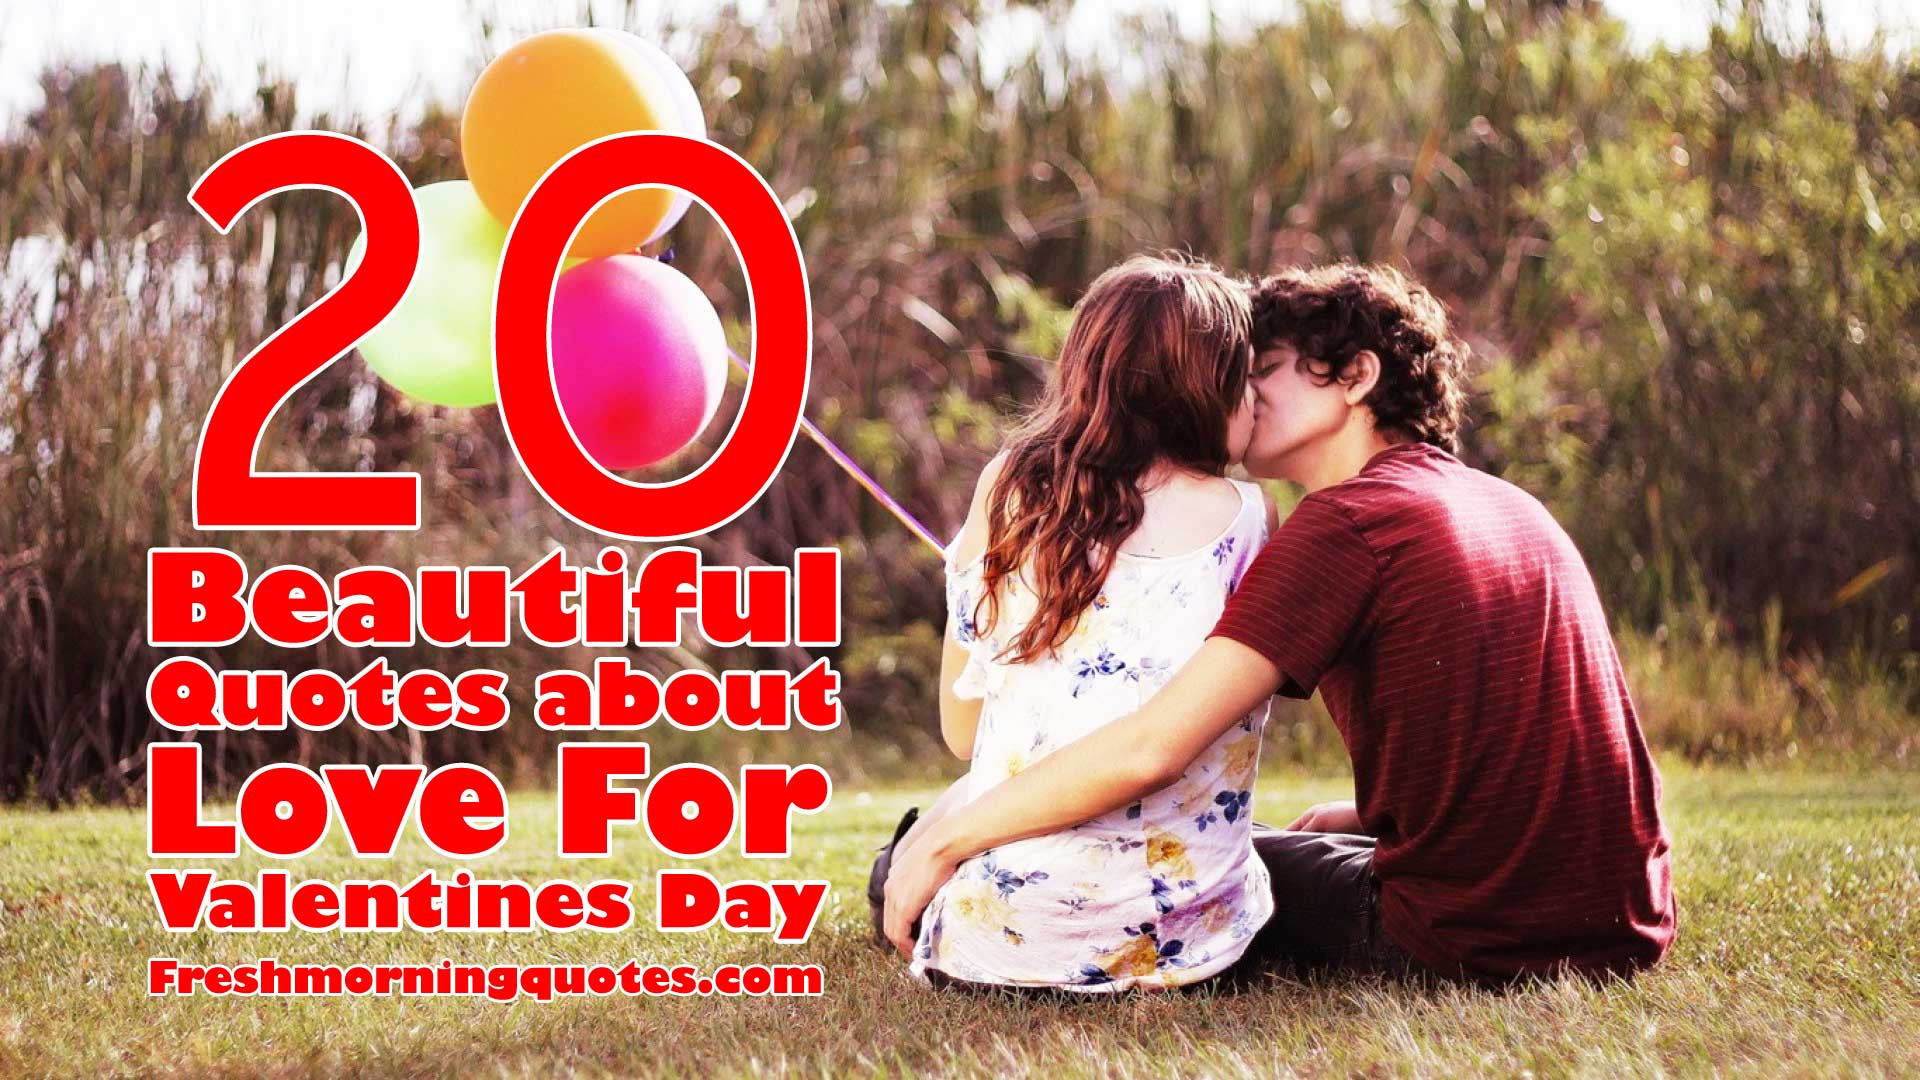 Quotes For Valentines Day
 20 Beautiful Quotes about Love for Valentines Day